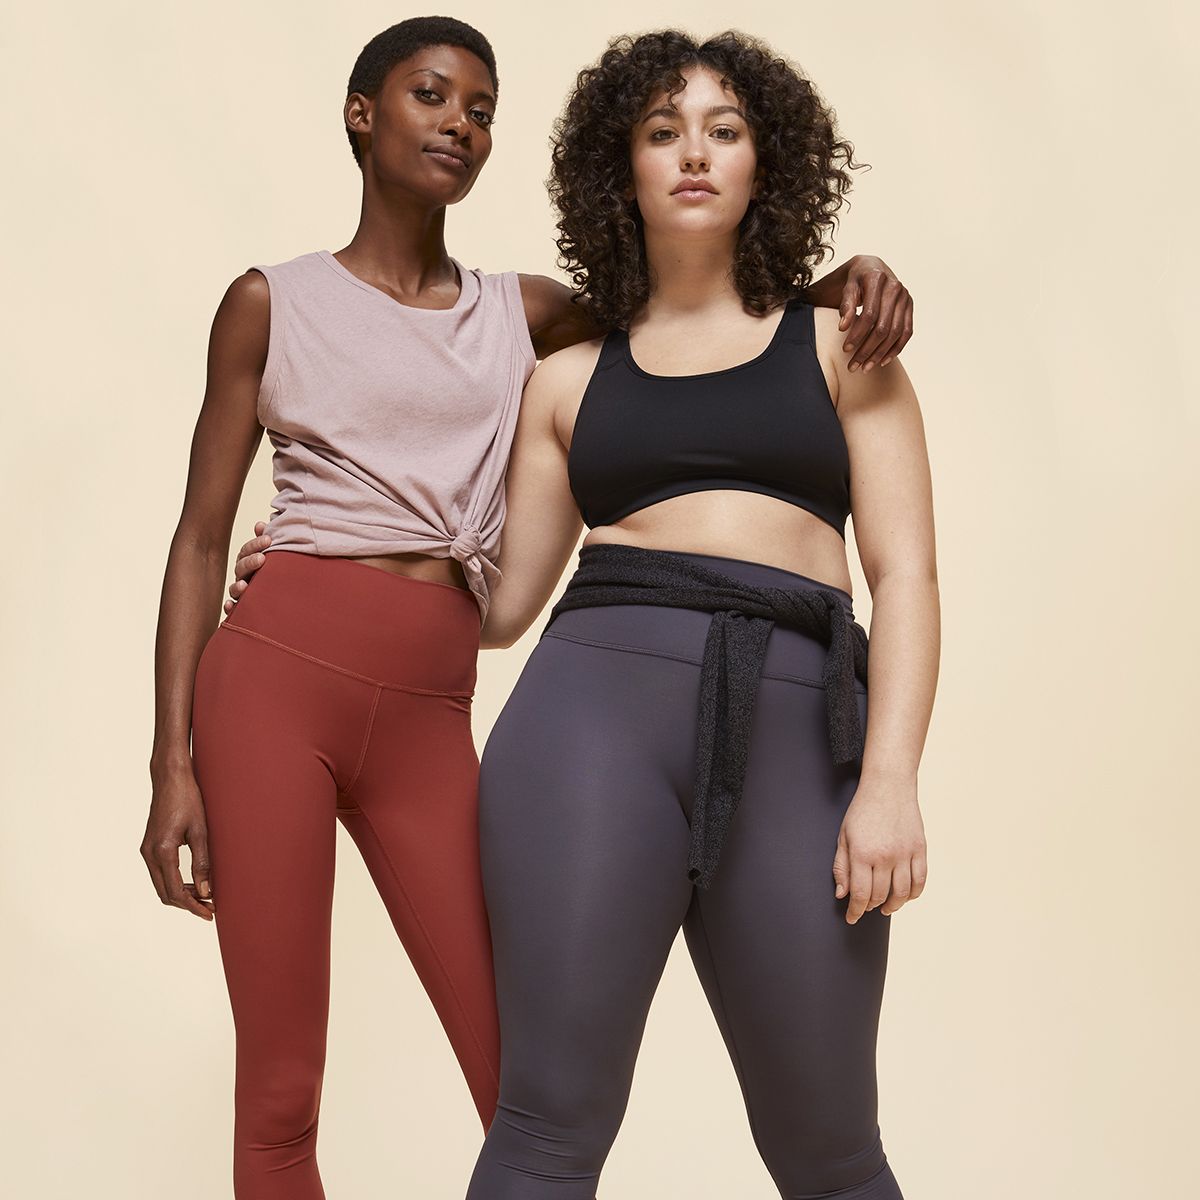 Everlane Perform Legging Review - Jeans and a Teacup